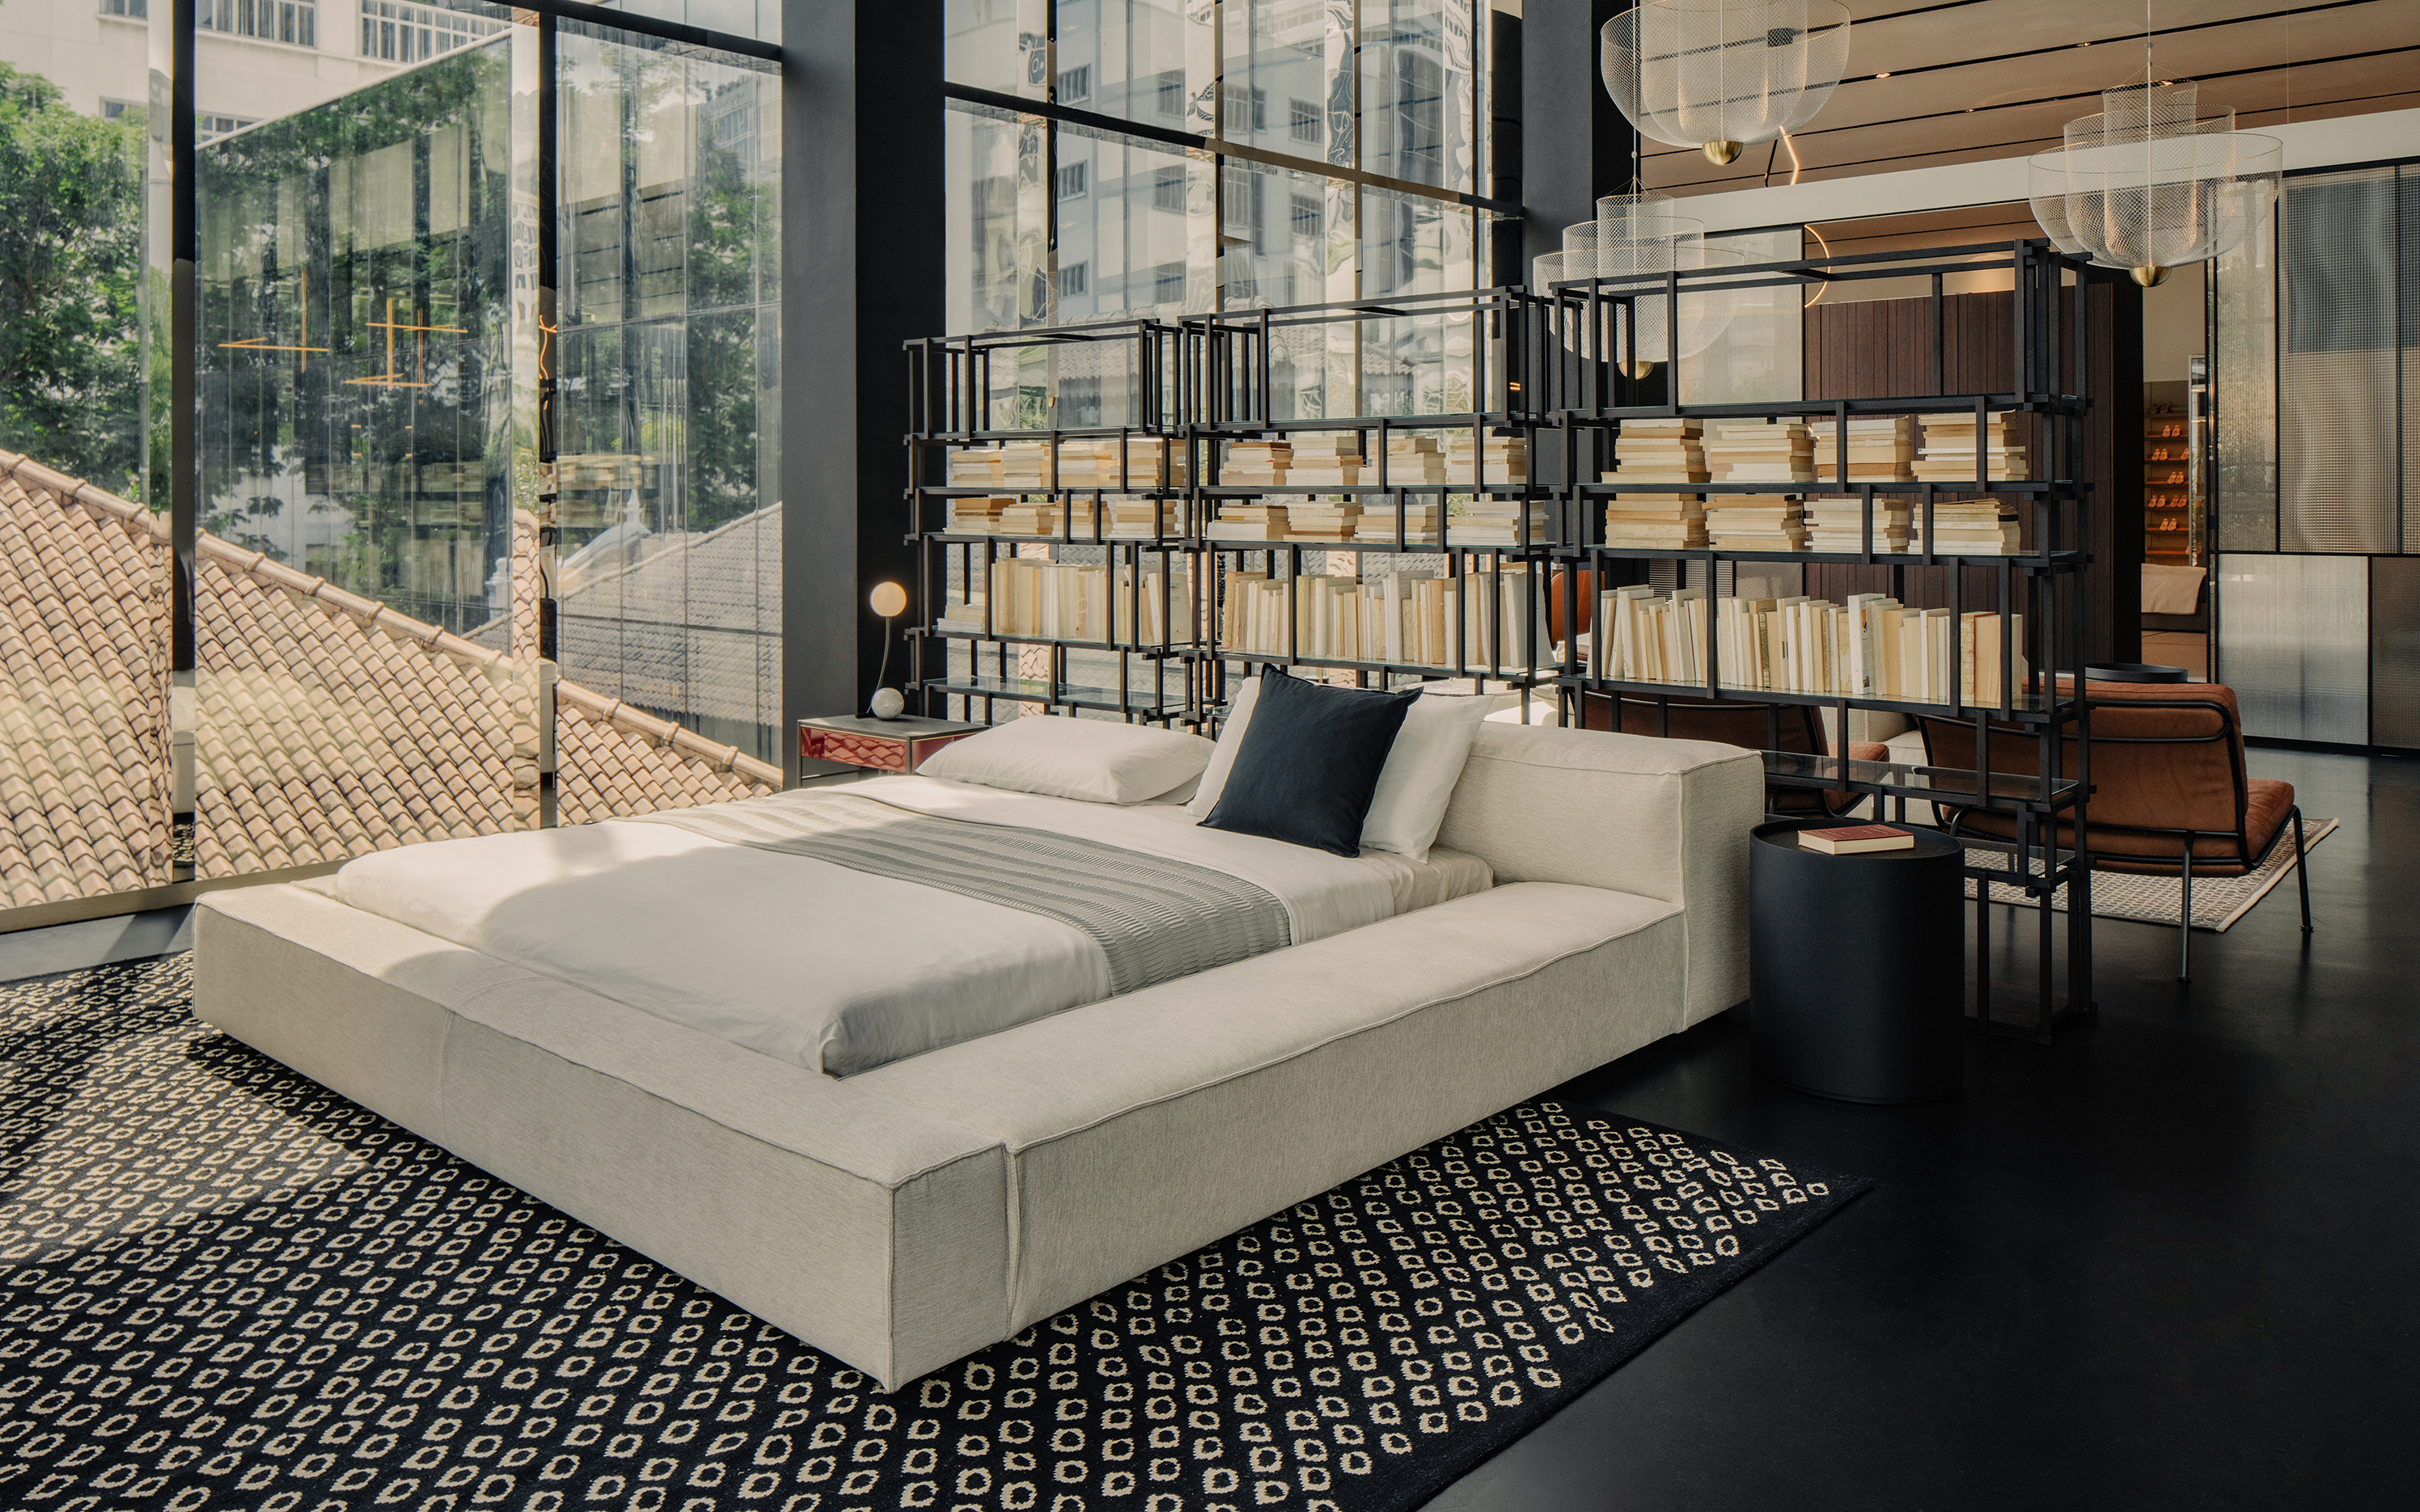 The Extrasoft bed designed by Piero Lissoni and the Off Cut storage system designed by Nathan Yong for Living Divani. Image © Khoo Guo Jie, Khoogj.